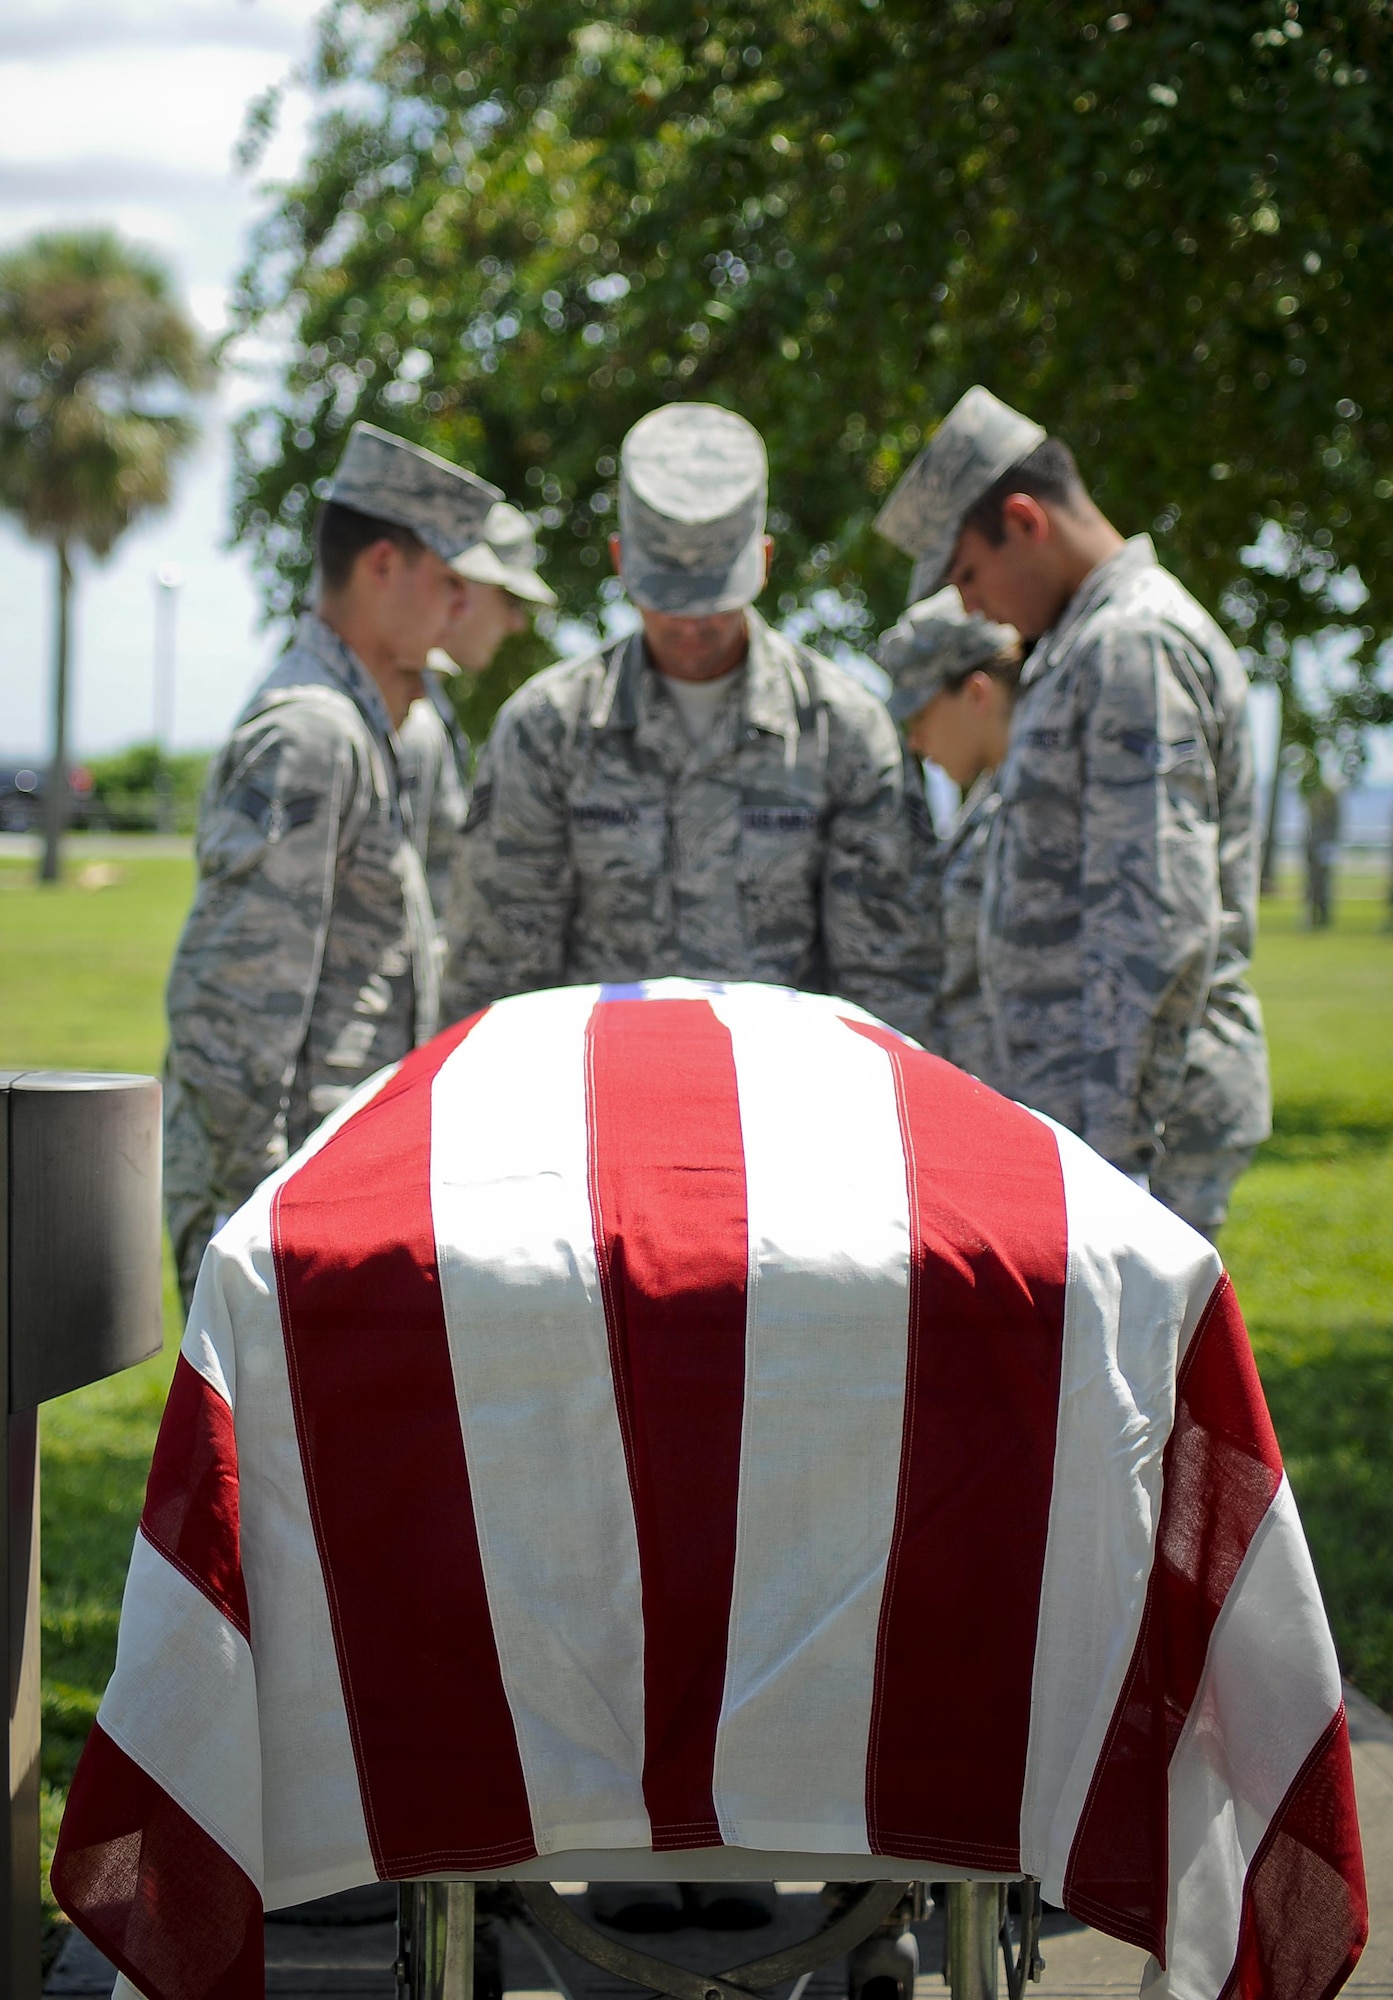 Base honor guardsmen practice pallbearer duties during an active-duty full-honors funeral demonstration at MacDill Air Force Base, Fla., Sept. 6, 2016. During the training with U.S. Air Force Honor Guard Mobile Training Team, base honor guardsmen from MacDill and surrounding areas received step-by-step instruction, followed by hands-on practice and finished with an active-duty full honors funeral demonstration. (U.S. Air Force photo by Airman 1st Class Mariette Adams)